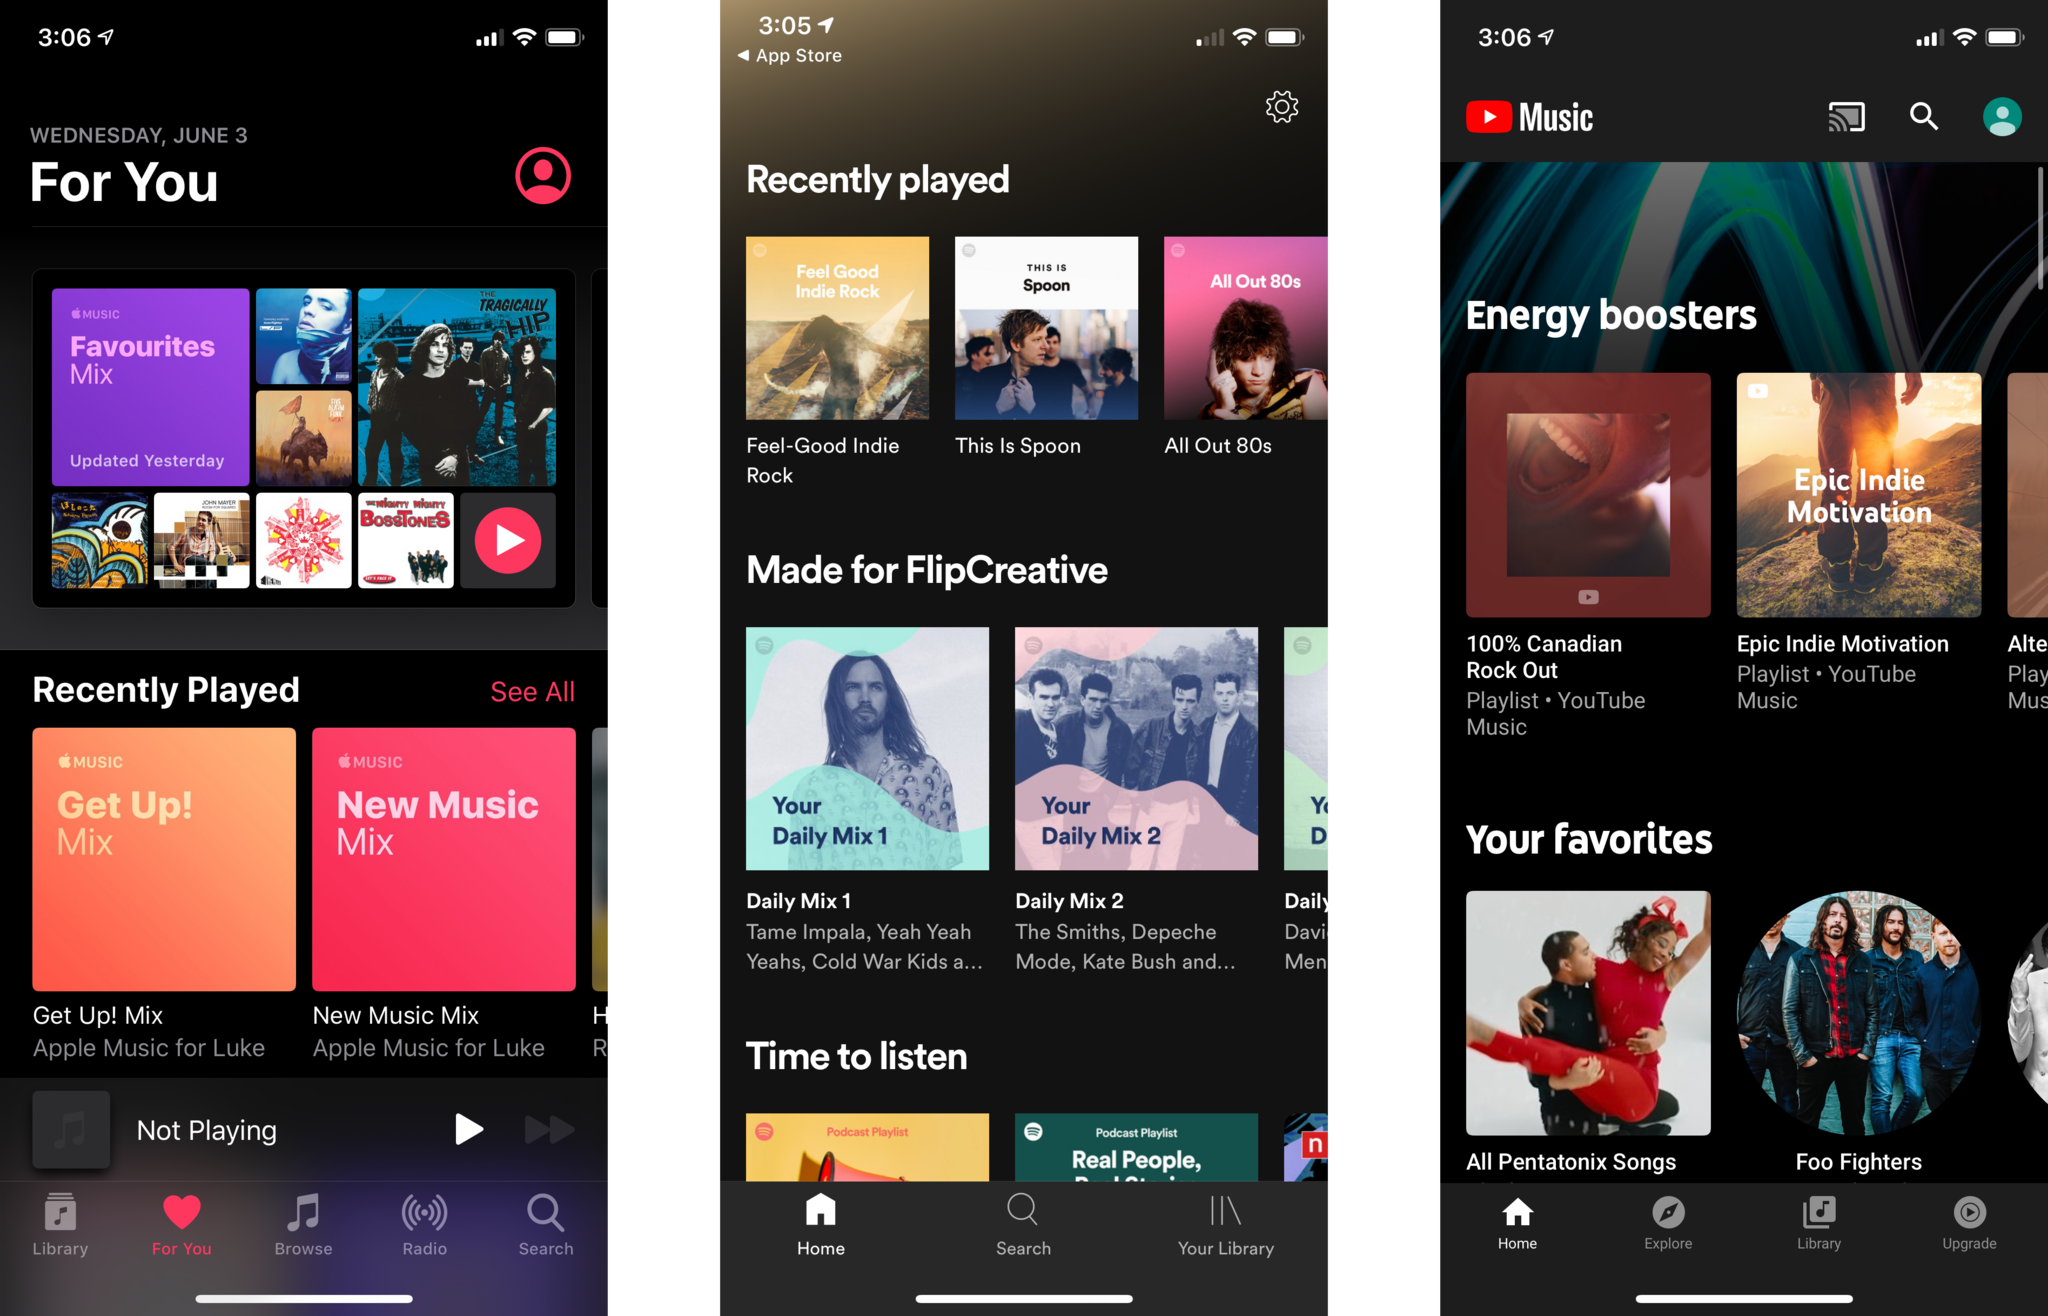 Apple Music, Spotify, and YouTube Music